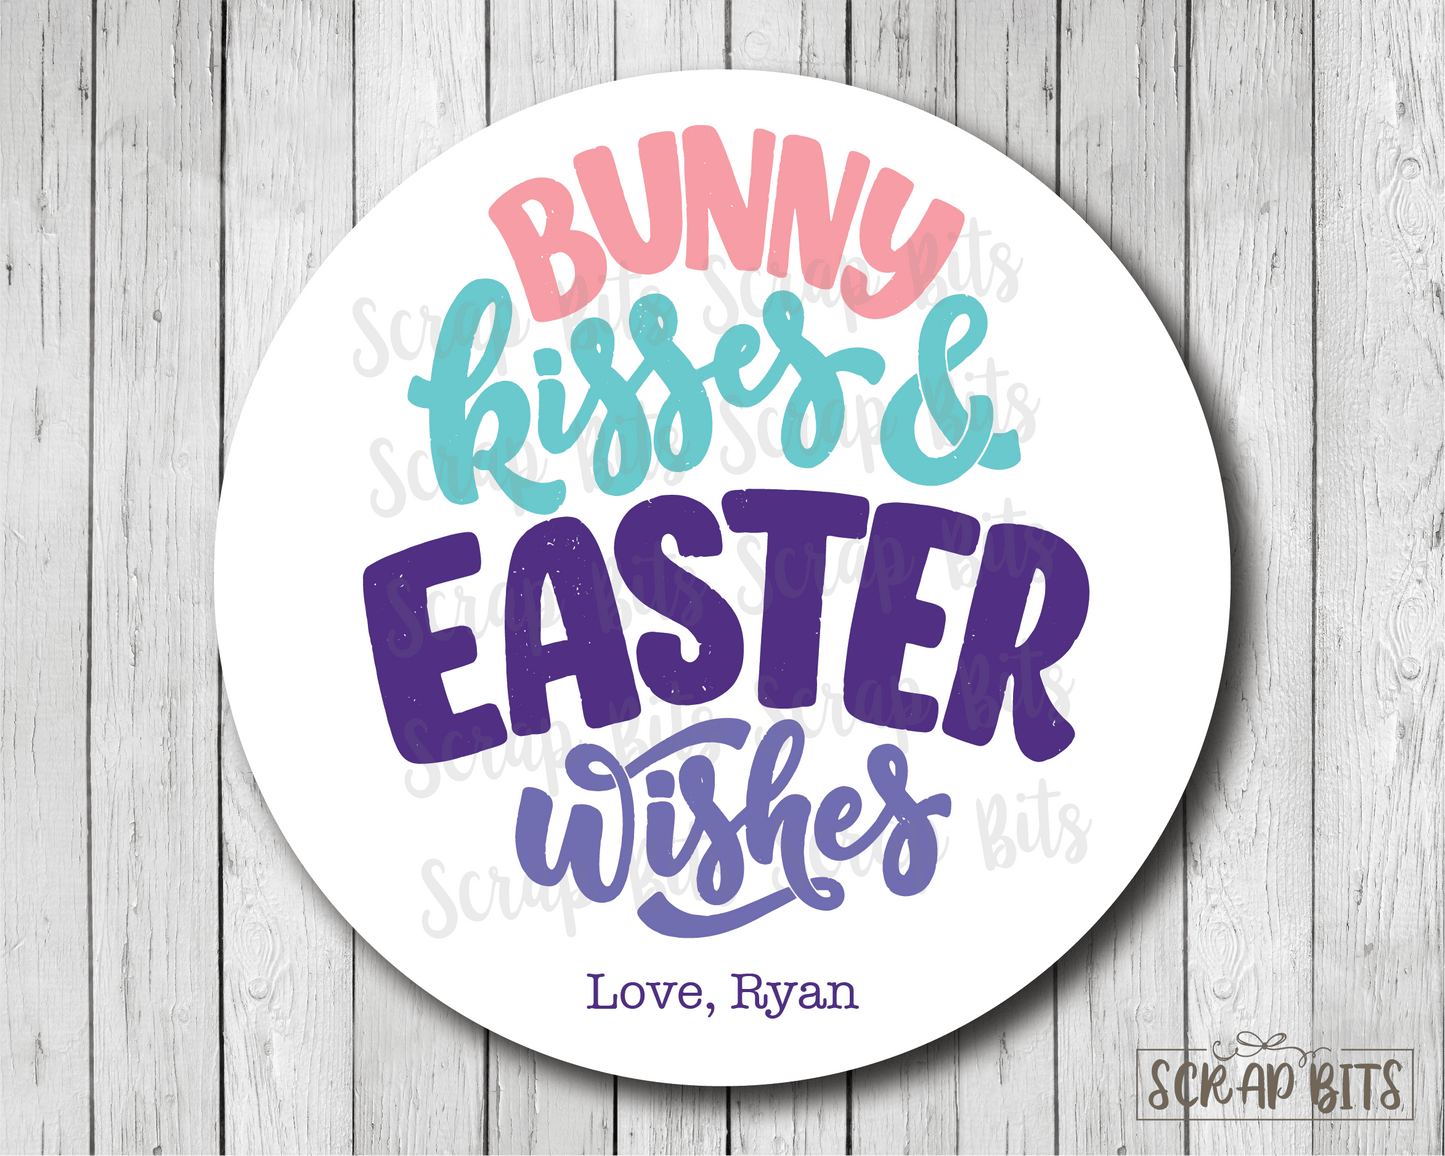 Bunny Kisses & Easter Wishes, Bold Cursive . Personalized Easter Gift Labels - Scrap Bits